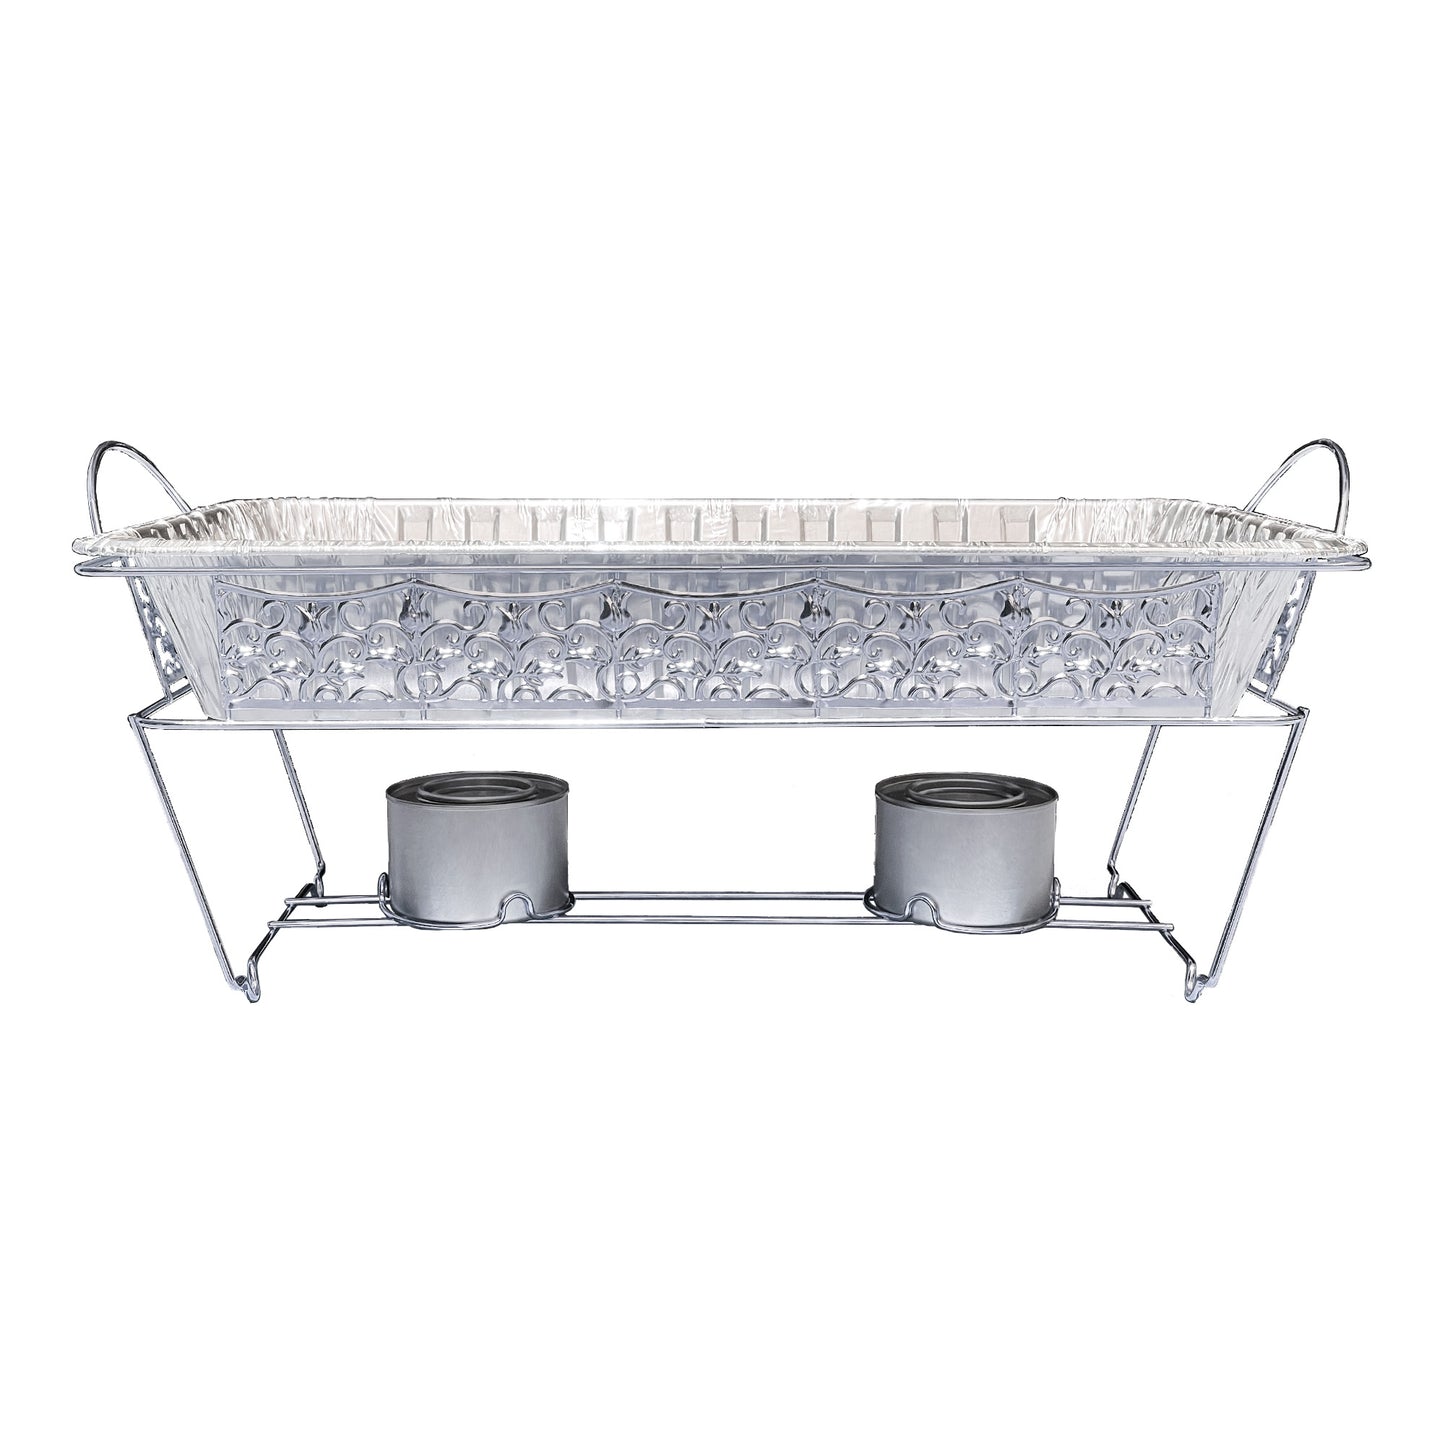 Hanna K. Signature Elements Decorative Disposable Silver Chafing Rack Disposable Hanna K   